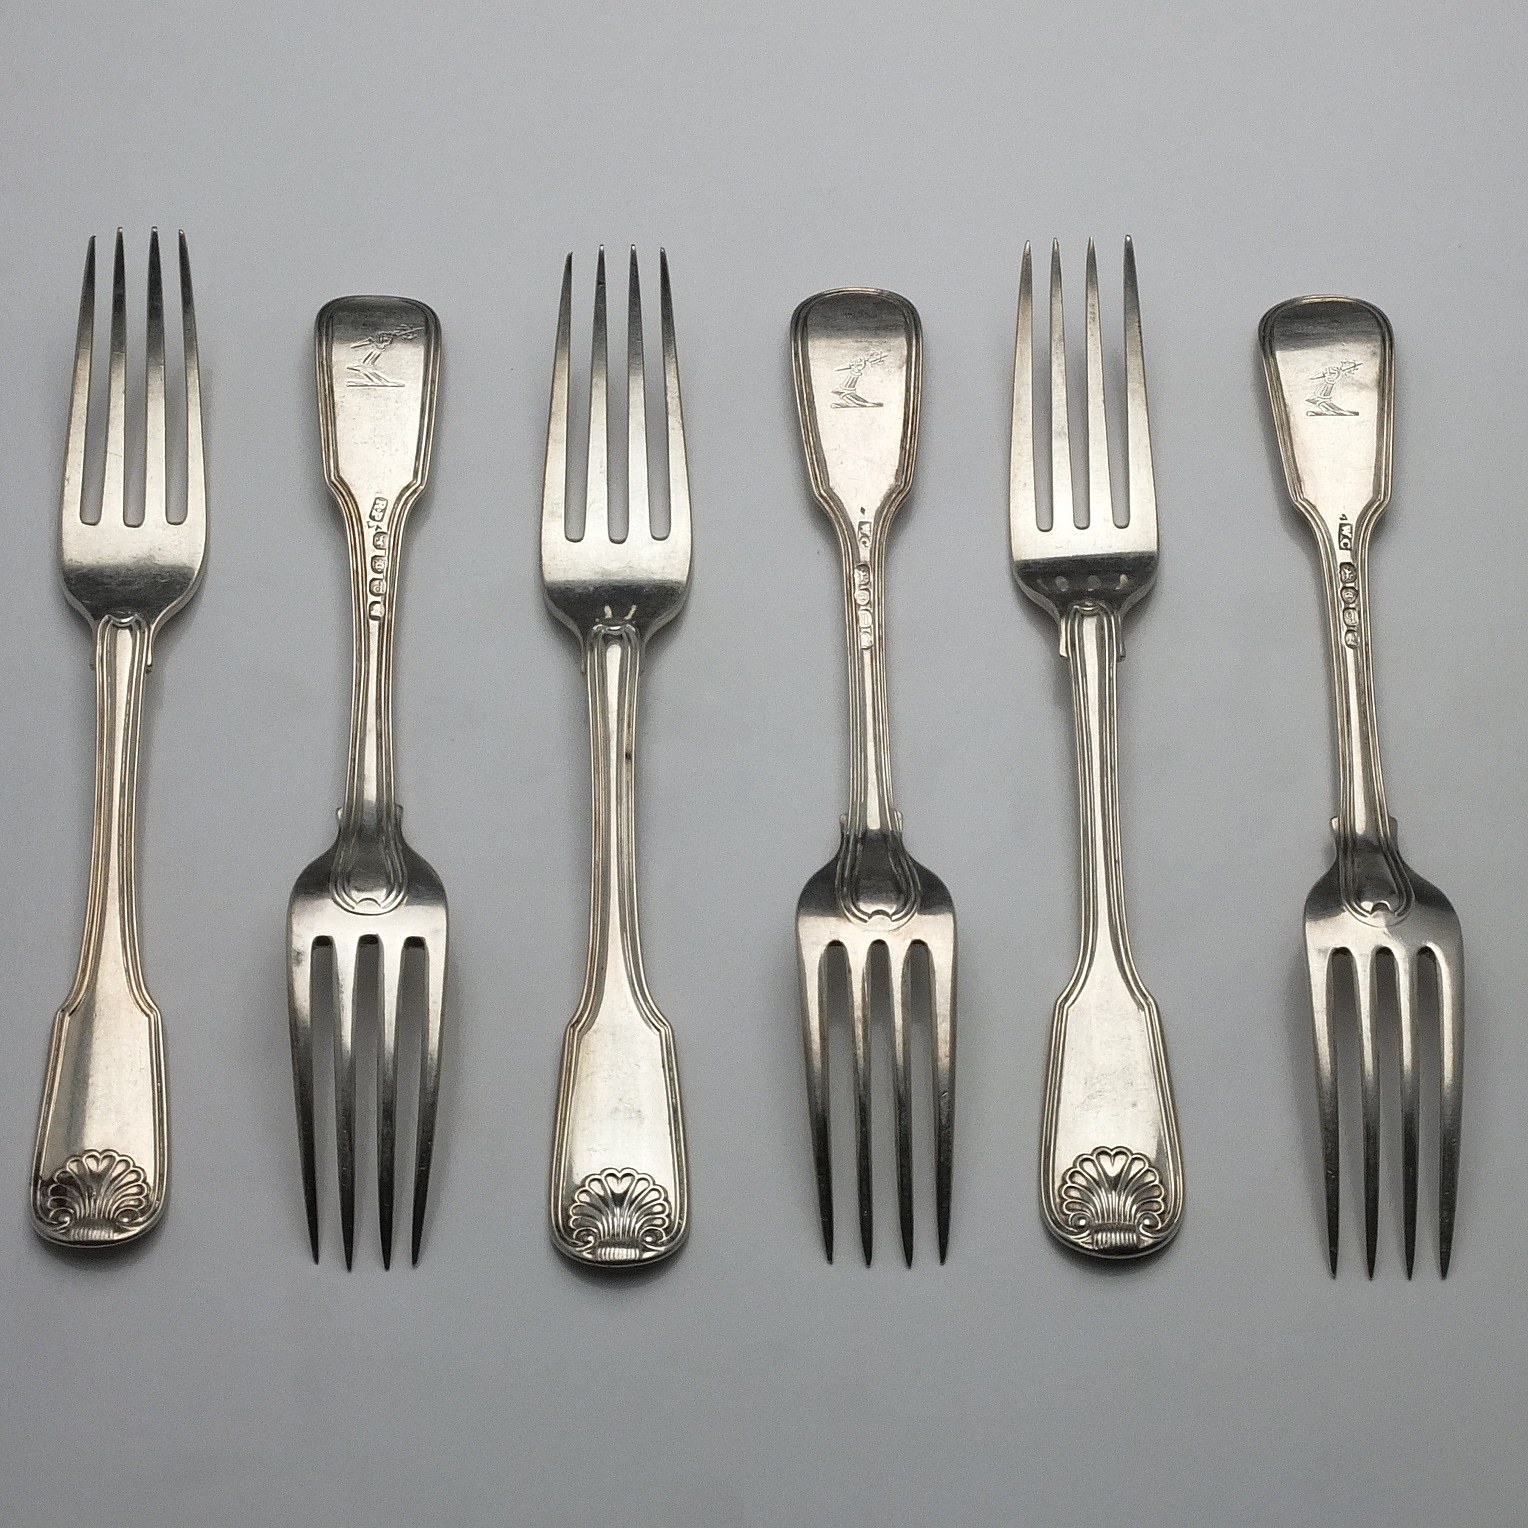 'Six Georgian Crested Sterling Silver Entree Forks, Including Three William Chawner II London 1831'